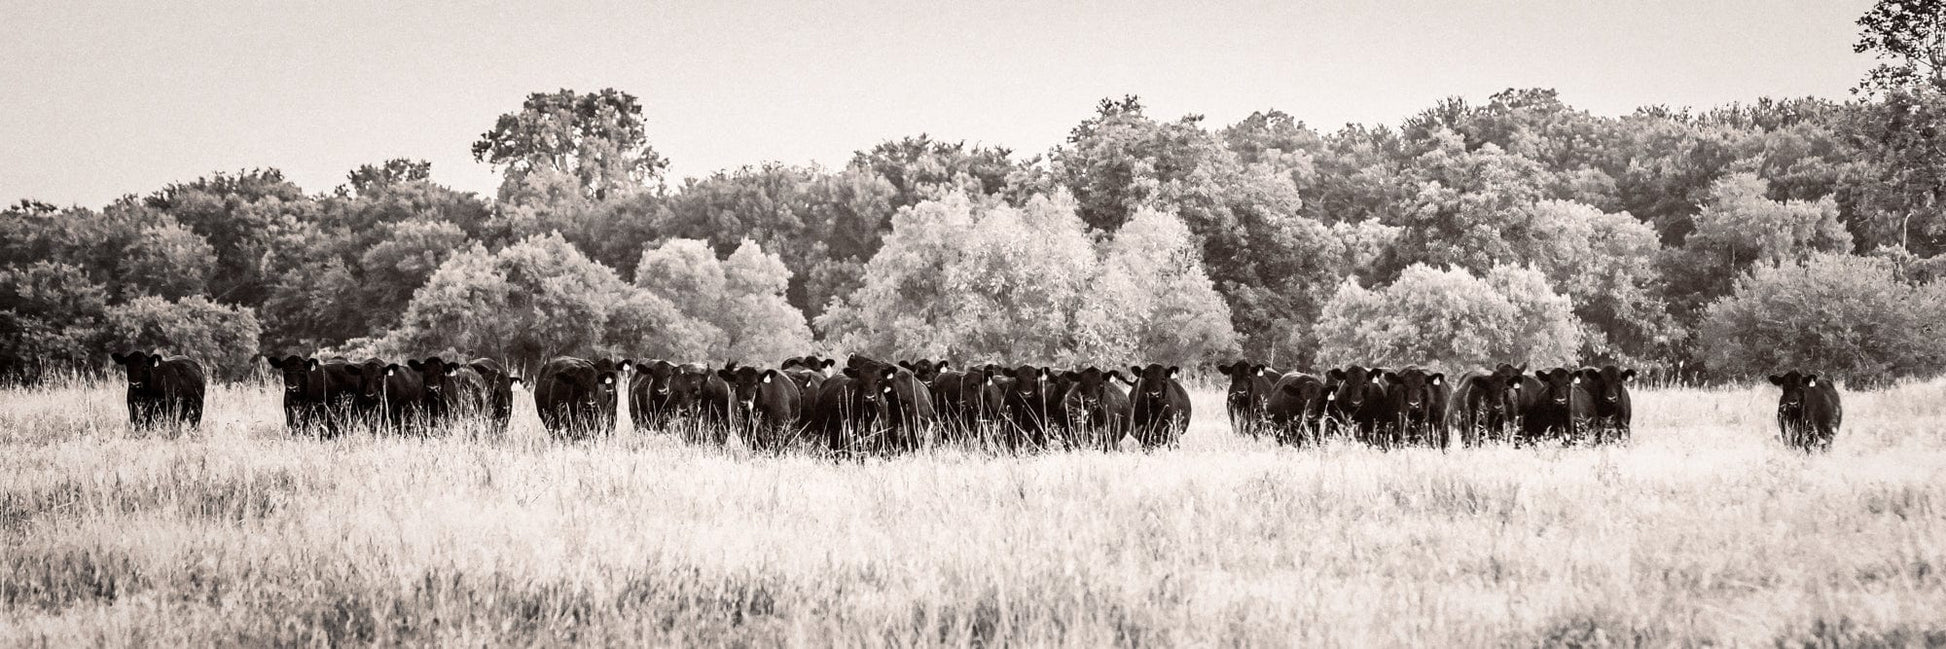 Panoramic Angus Cattle Canvas Paper Photo Print / 12 x 36 Inches Wall Art Teri James Photography